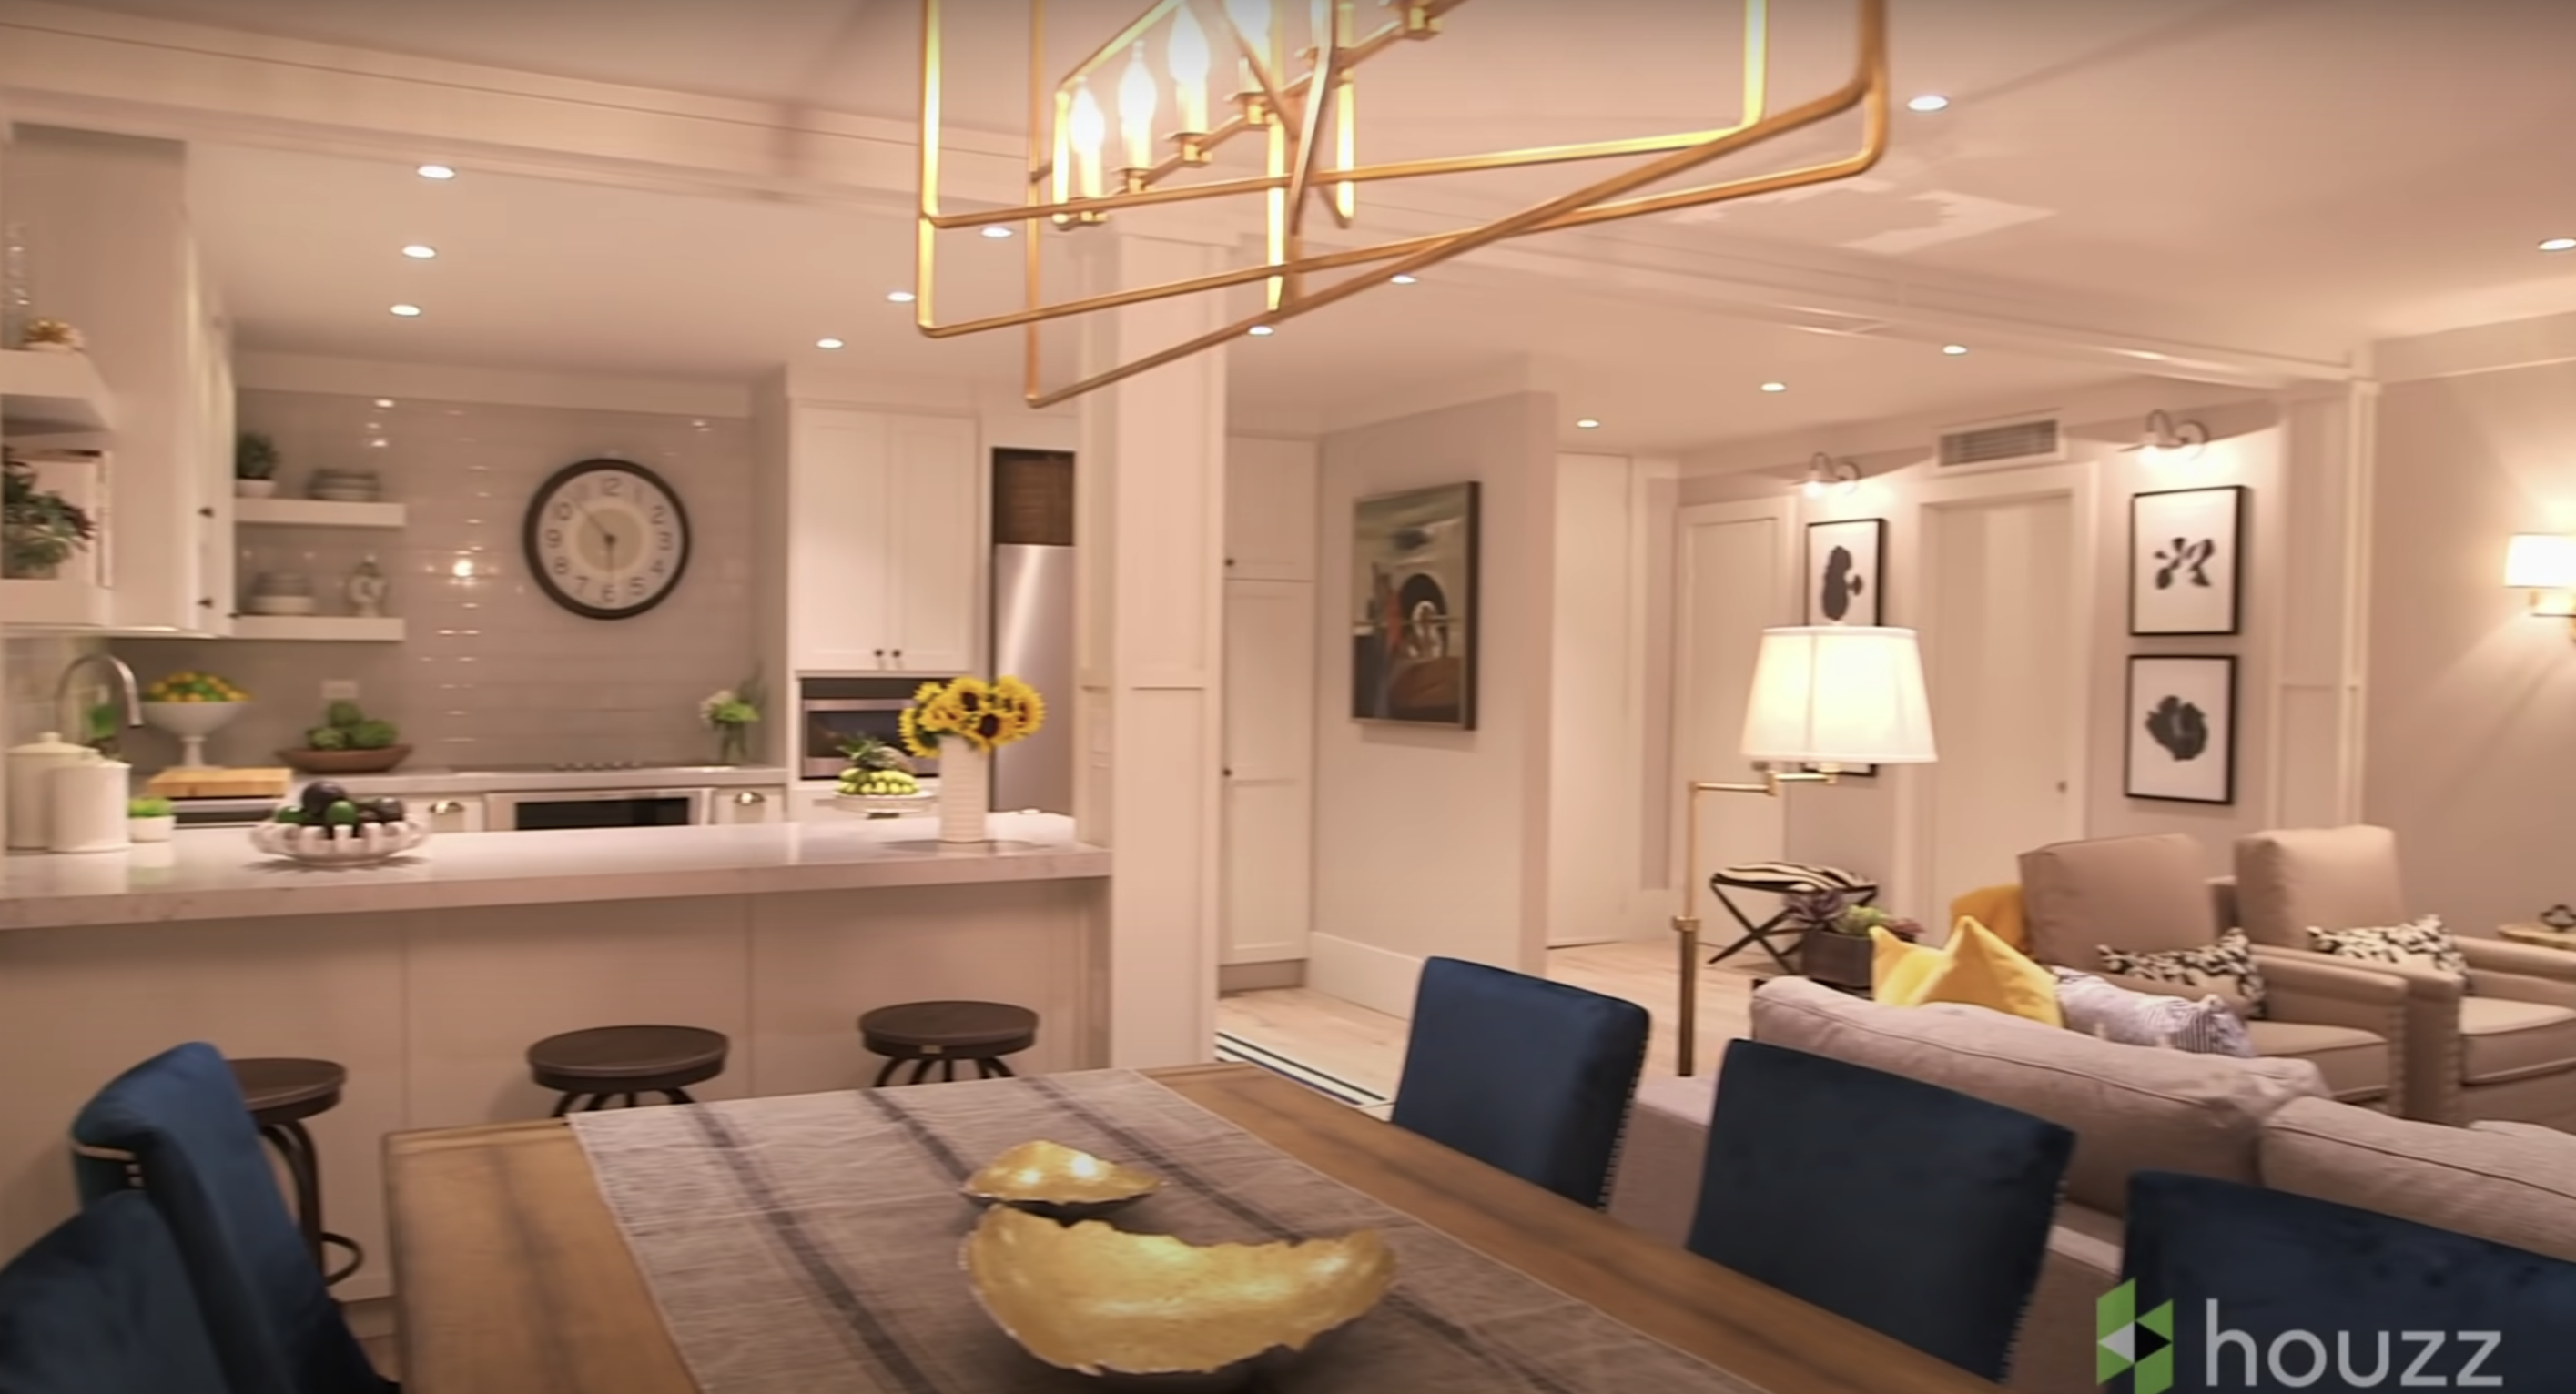 The spruced-up kitchen area and living space of Mila Kunis' family condo | Source: Youtube.com/HouzzTV